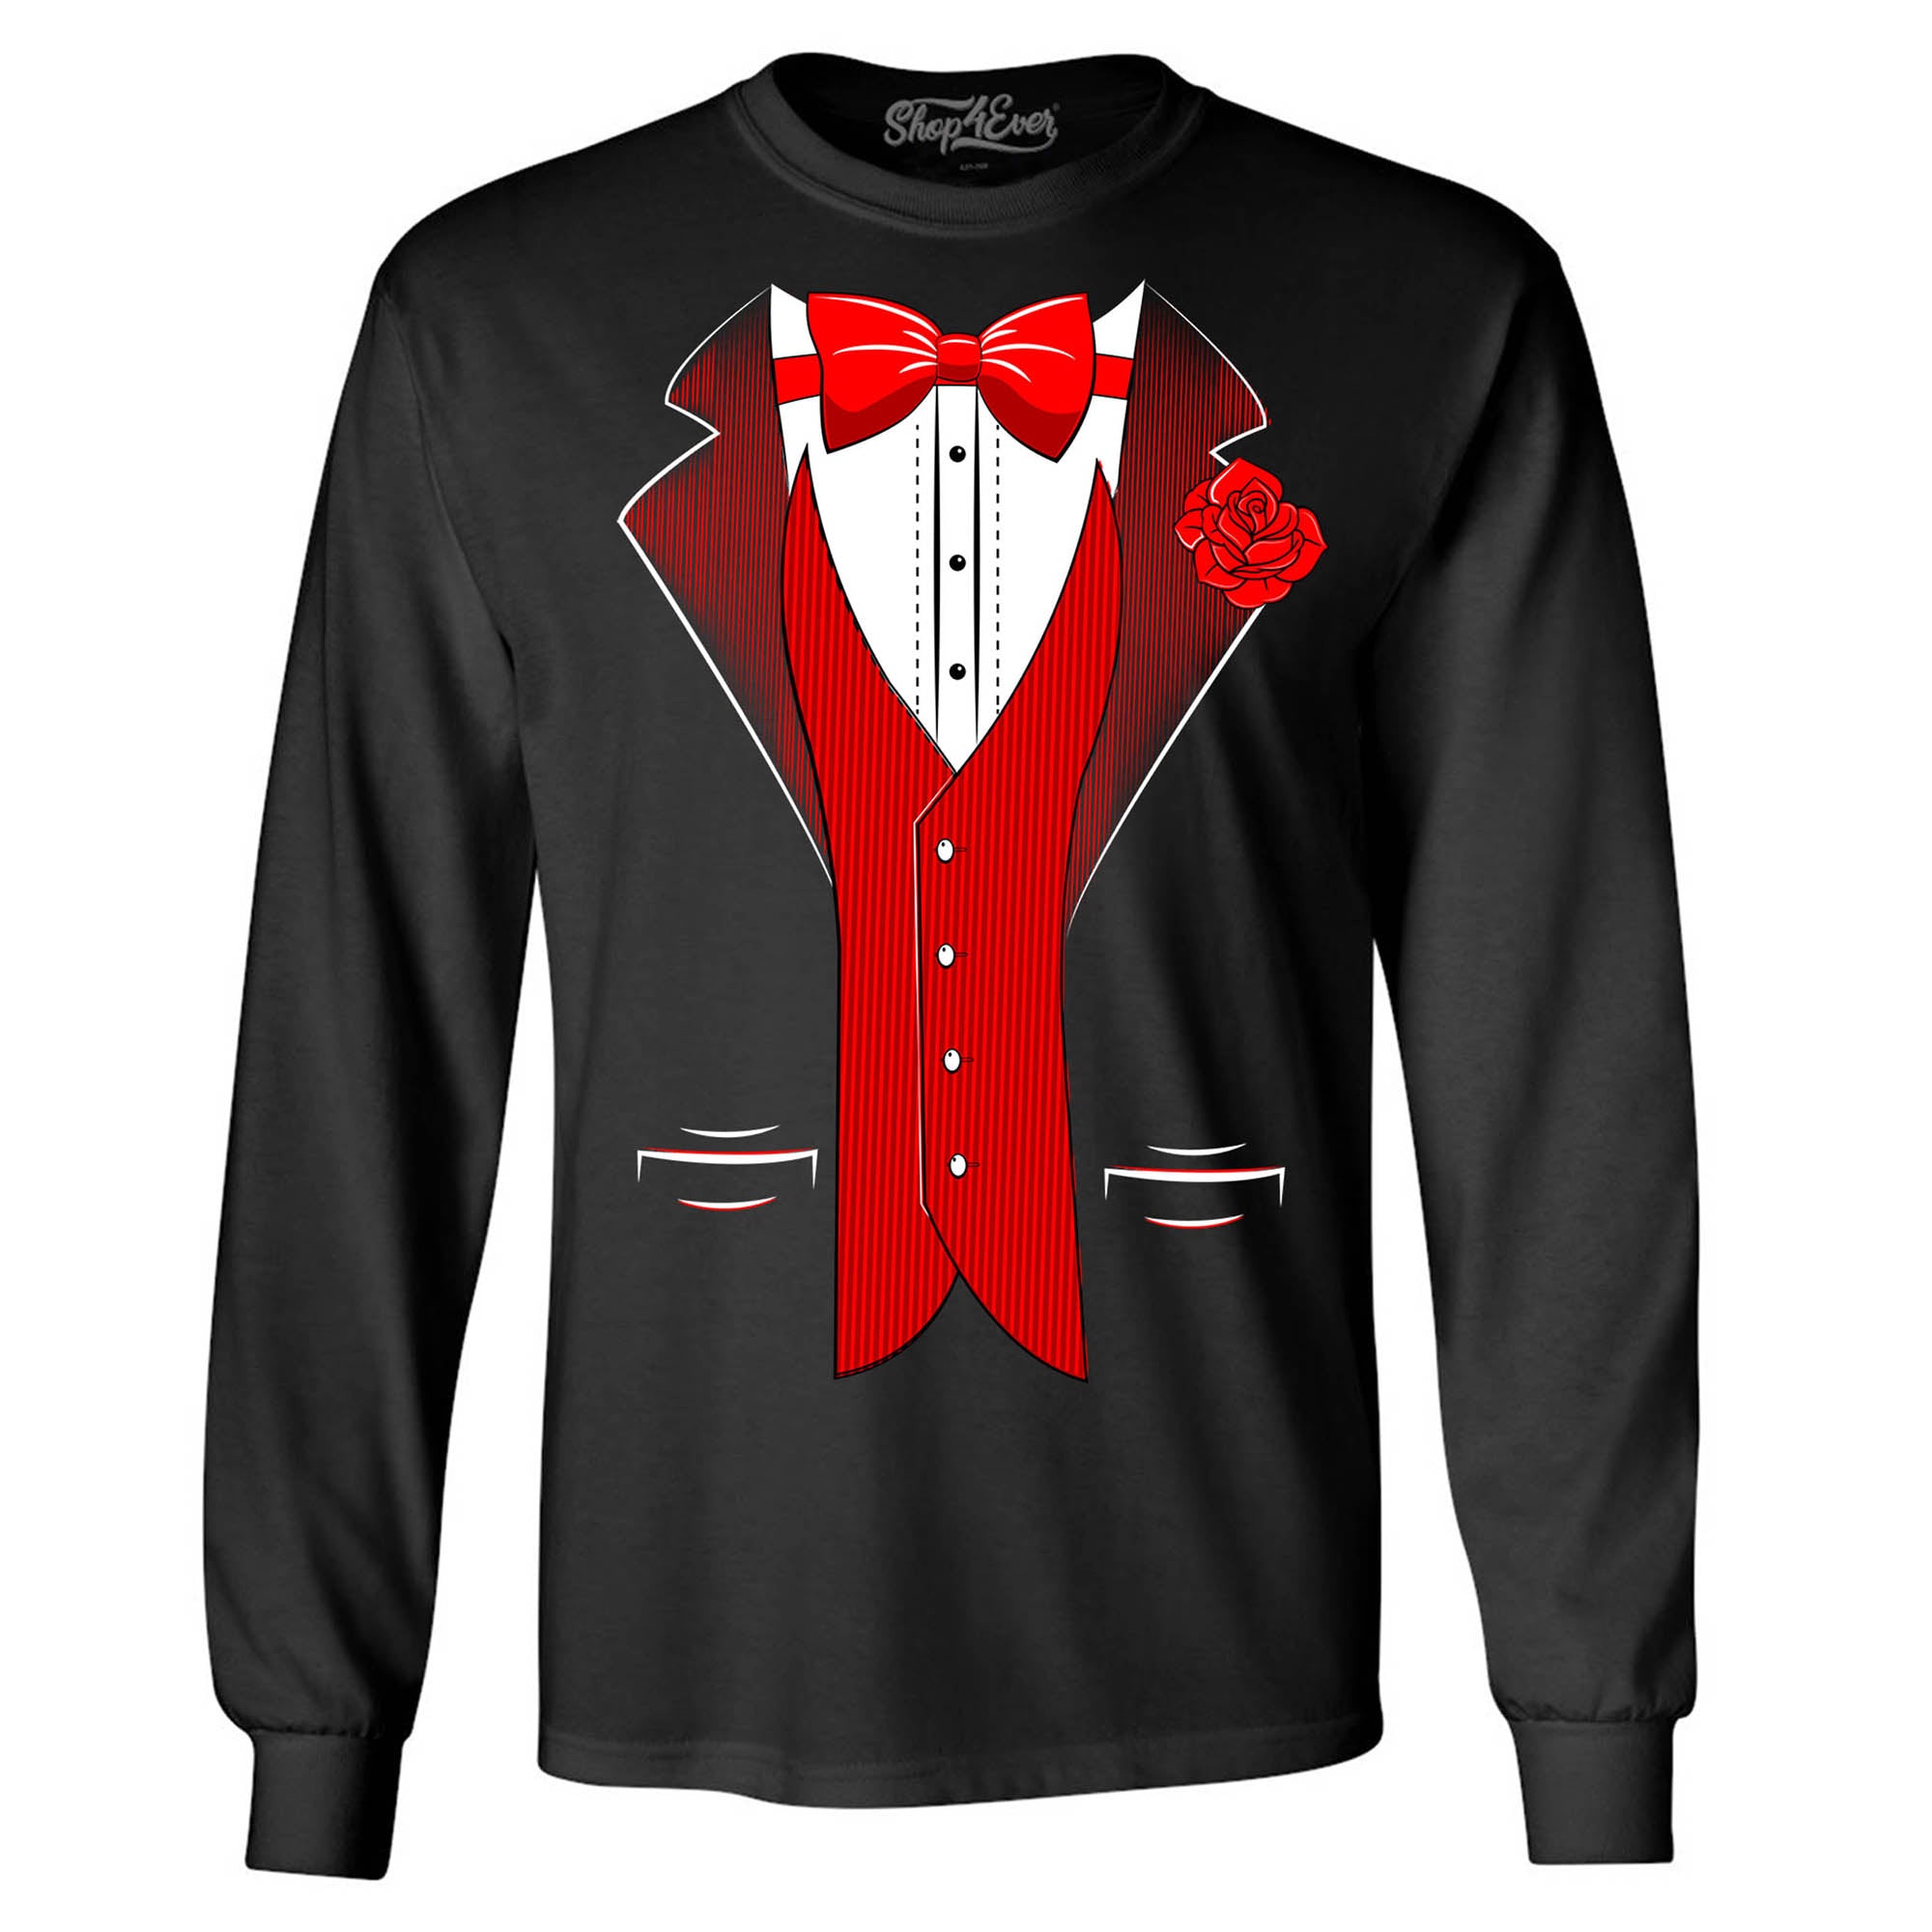 Classic Tuxedo with Red Rose Long Sleeve Shirt Party Costume Shirt